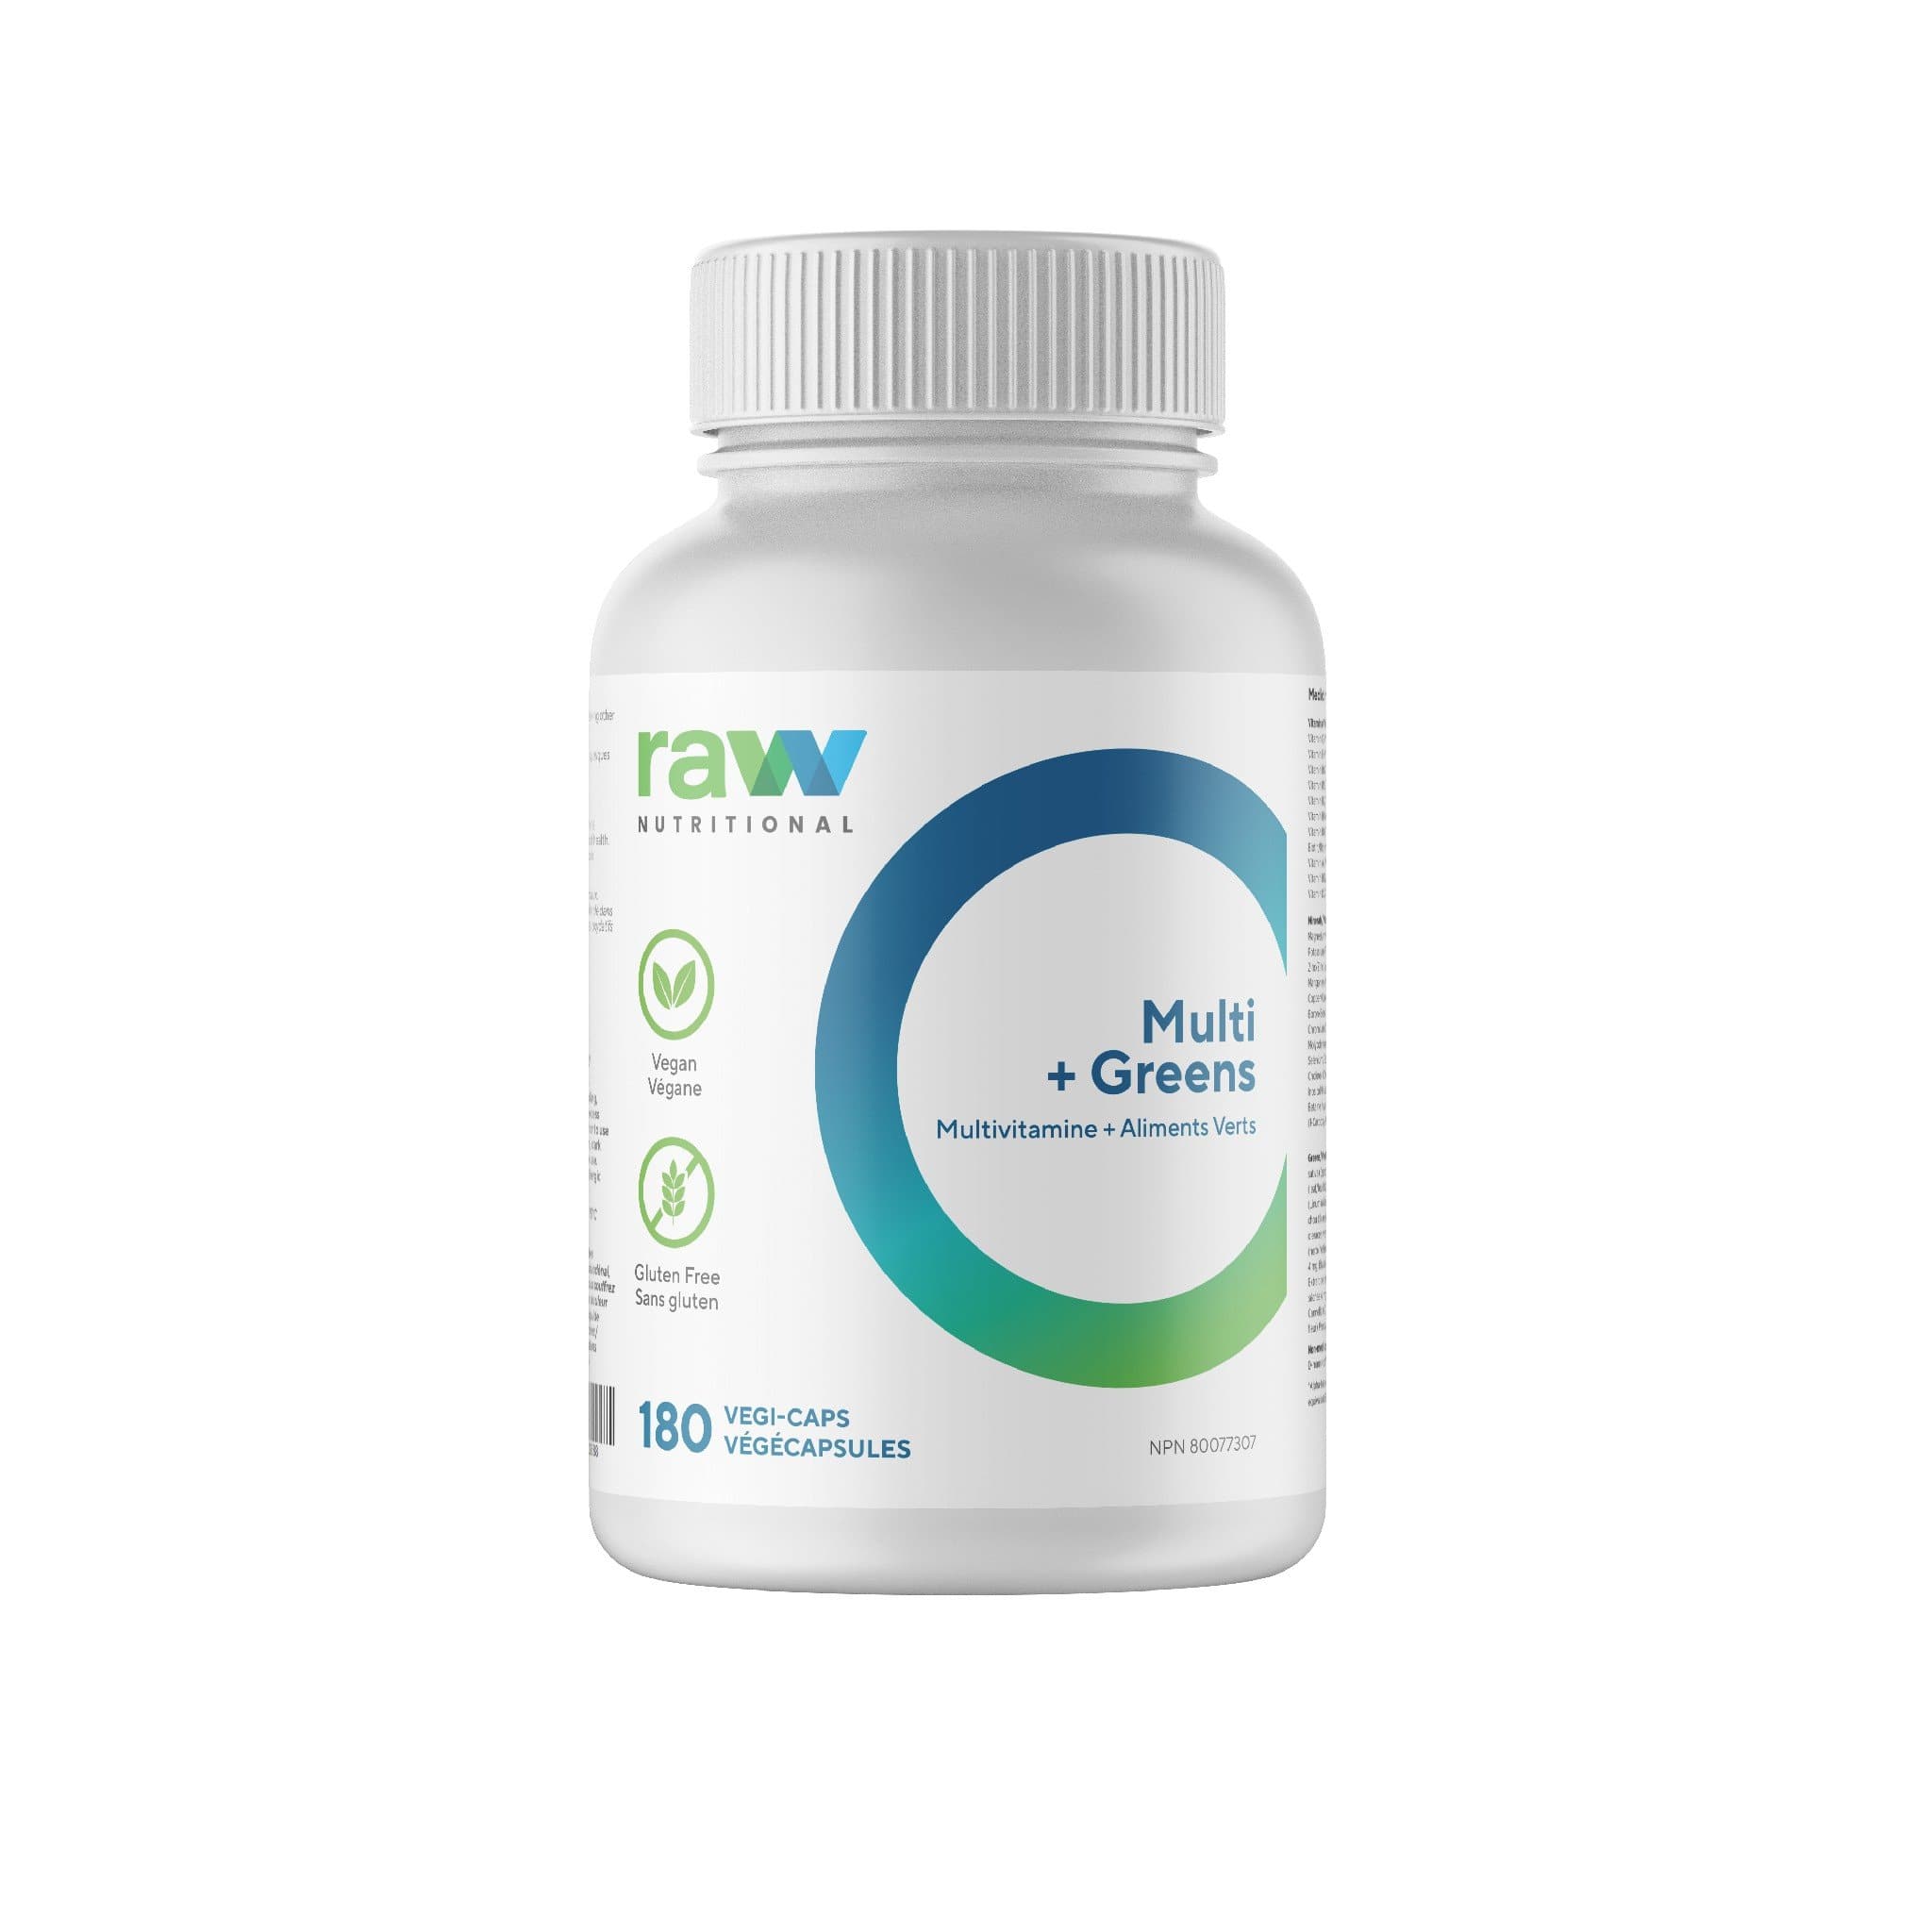 Raw Nutritional Multi + Greens 180 capsules | HERC'S Nutrition Canada